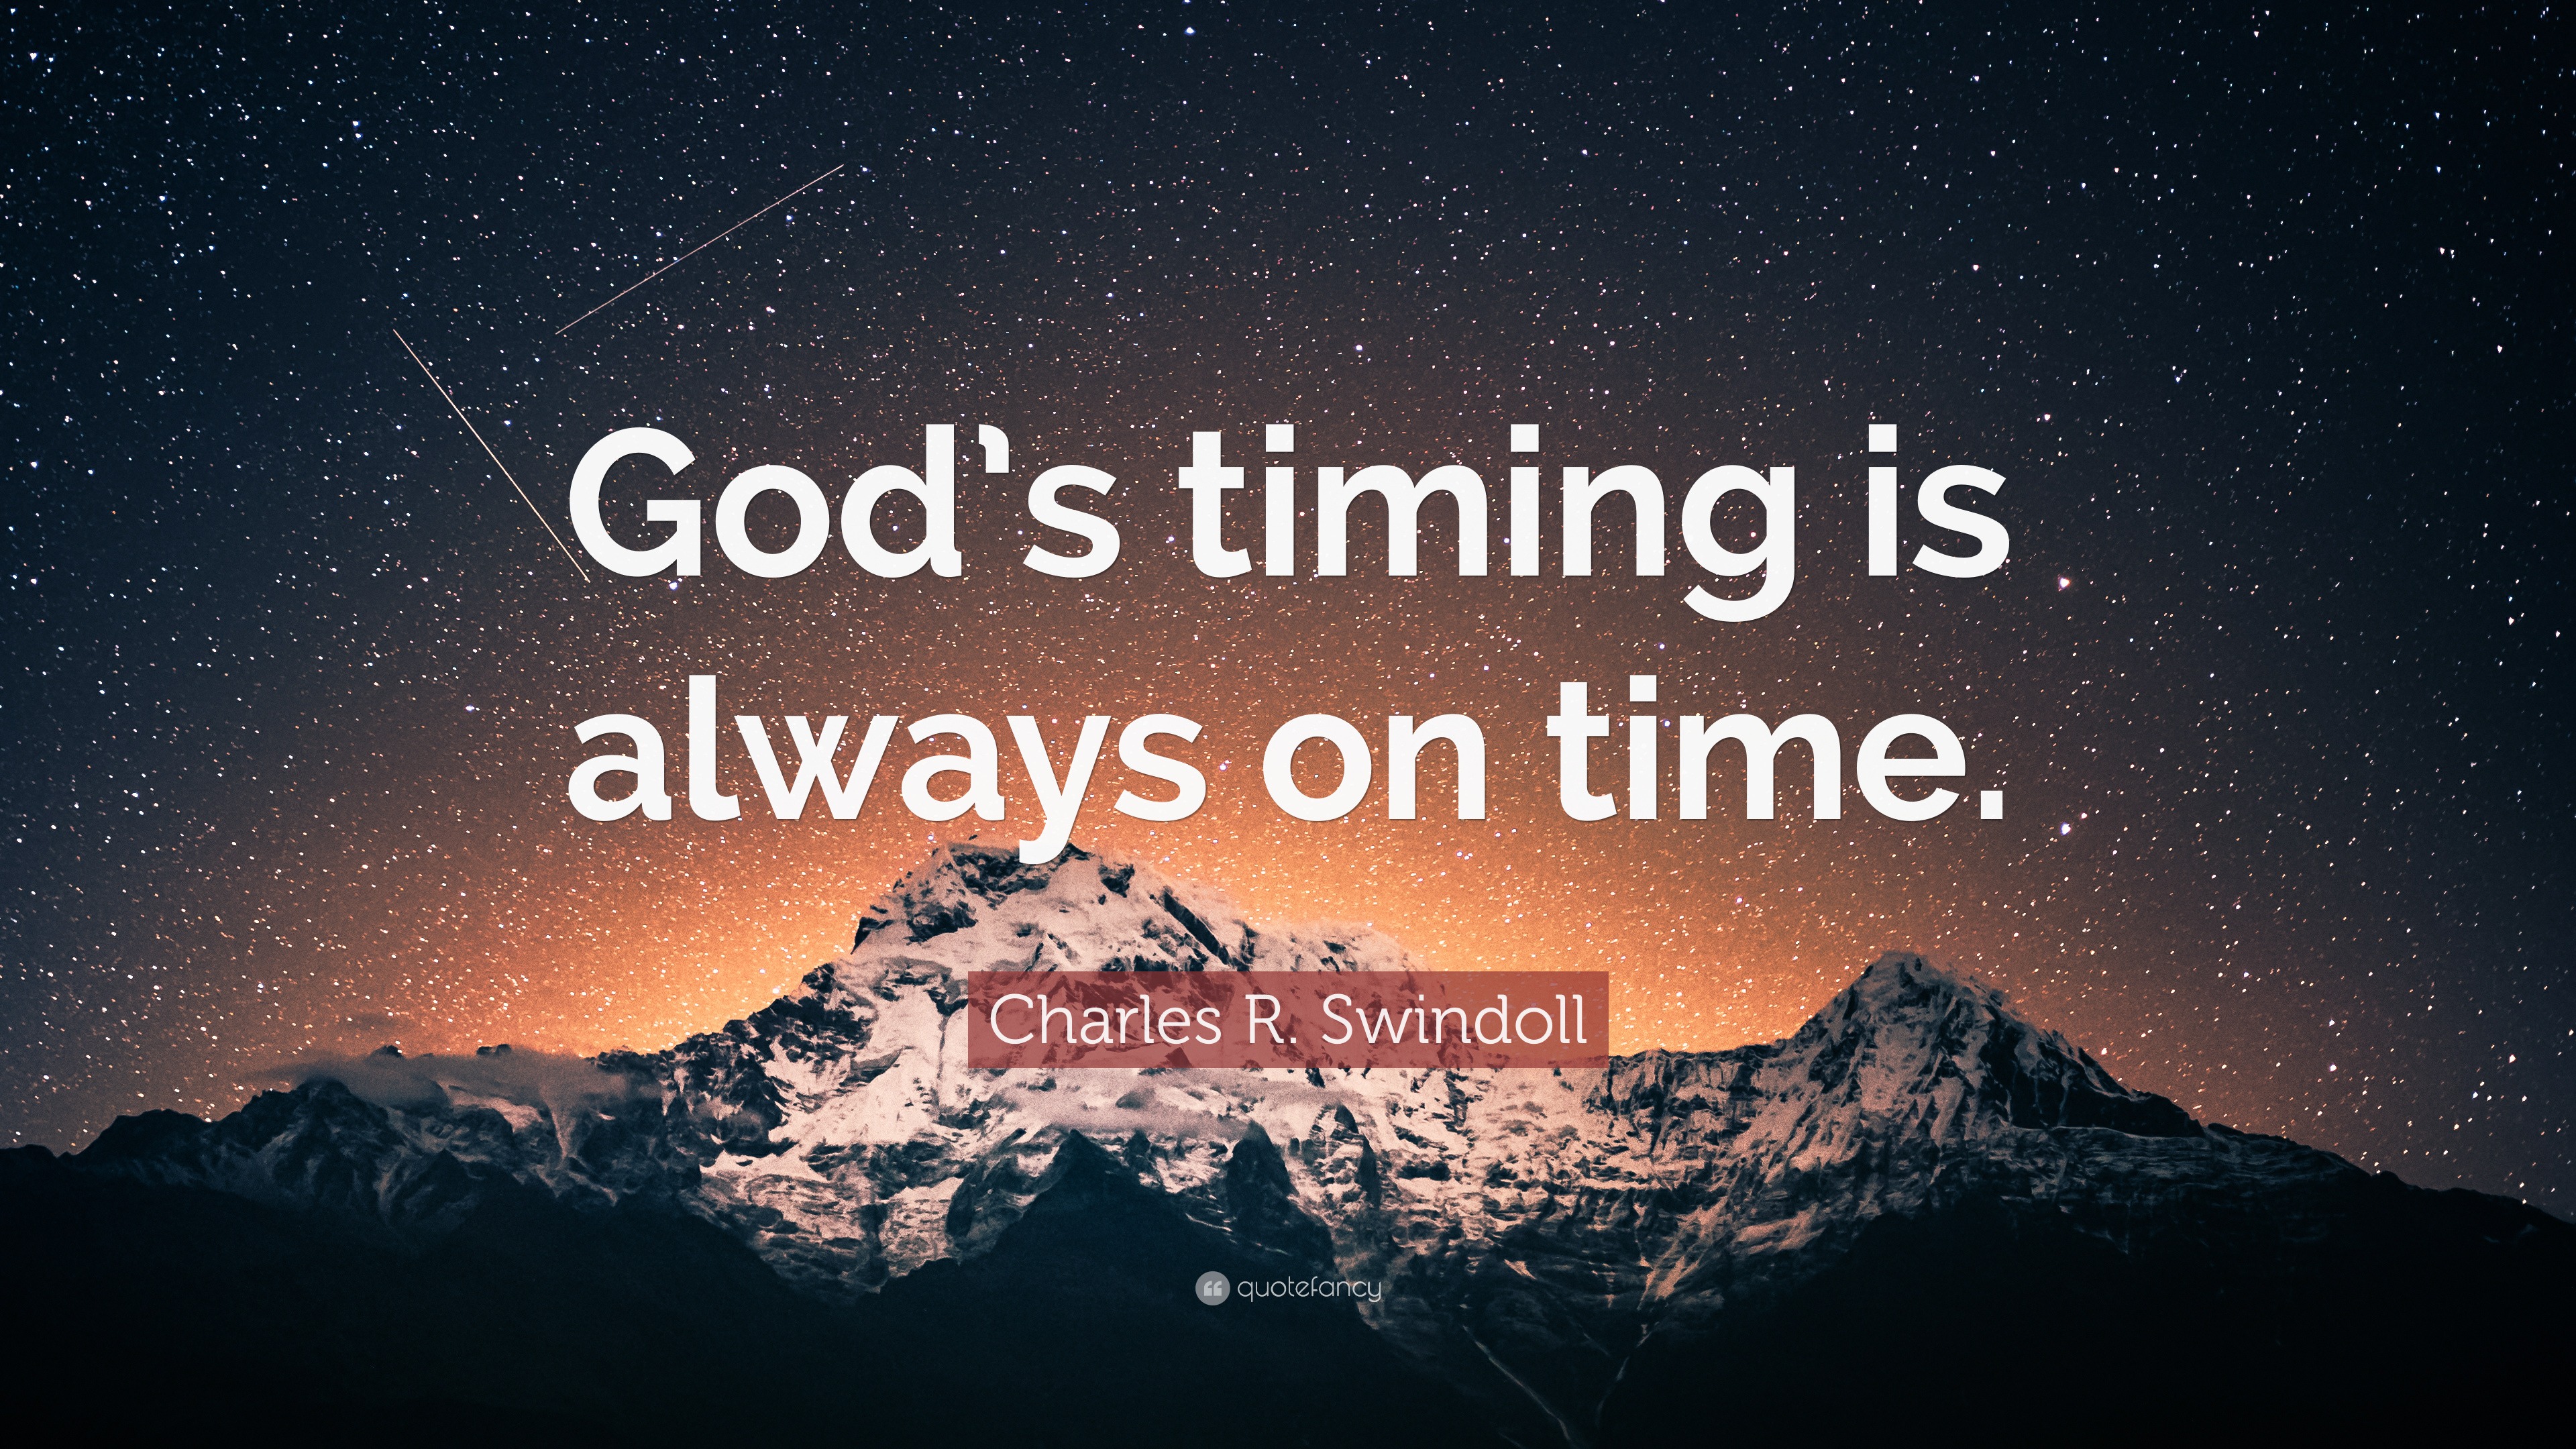 Charles R. Swindoll Quote “God’s timing is always on time.”